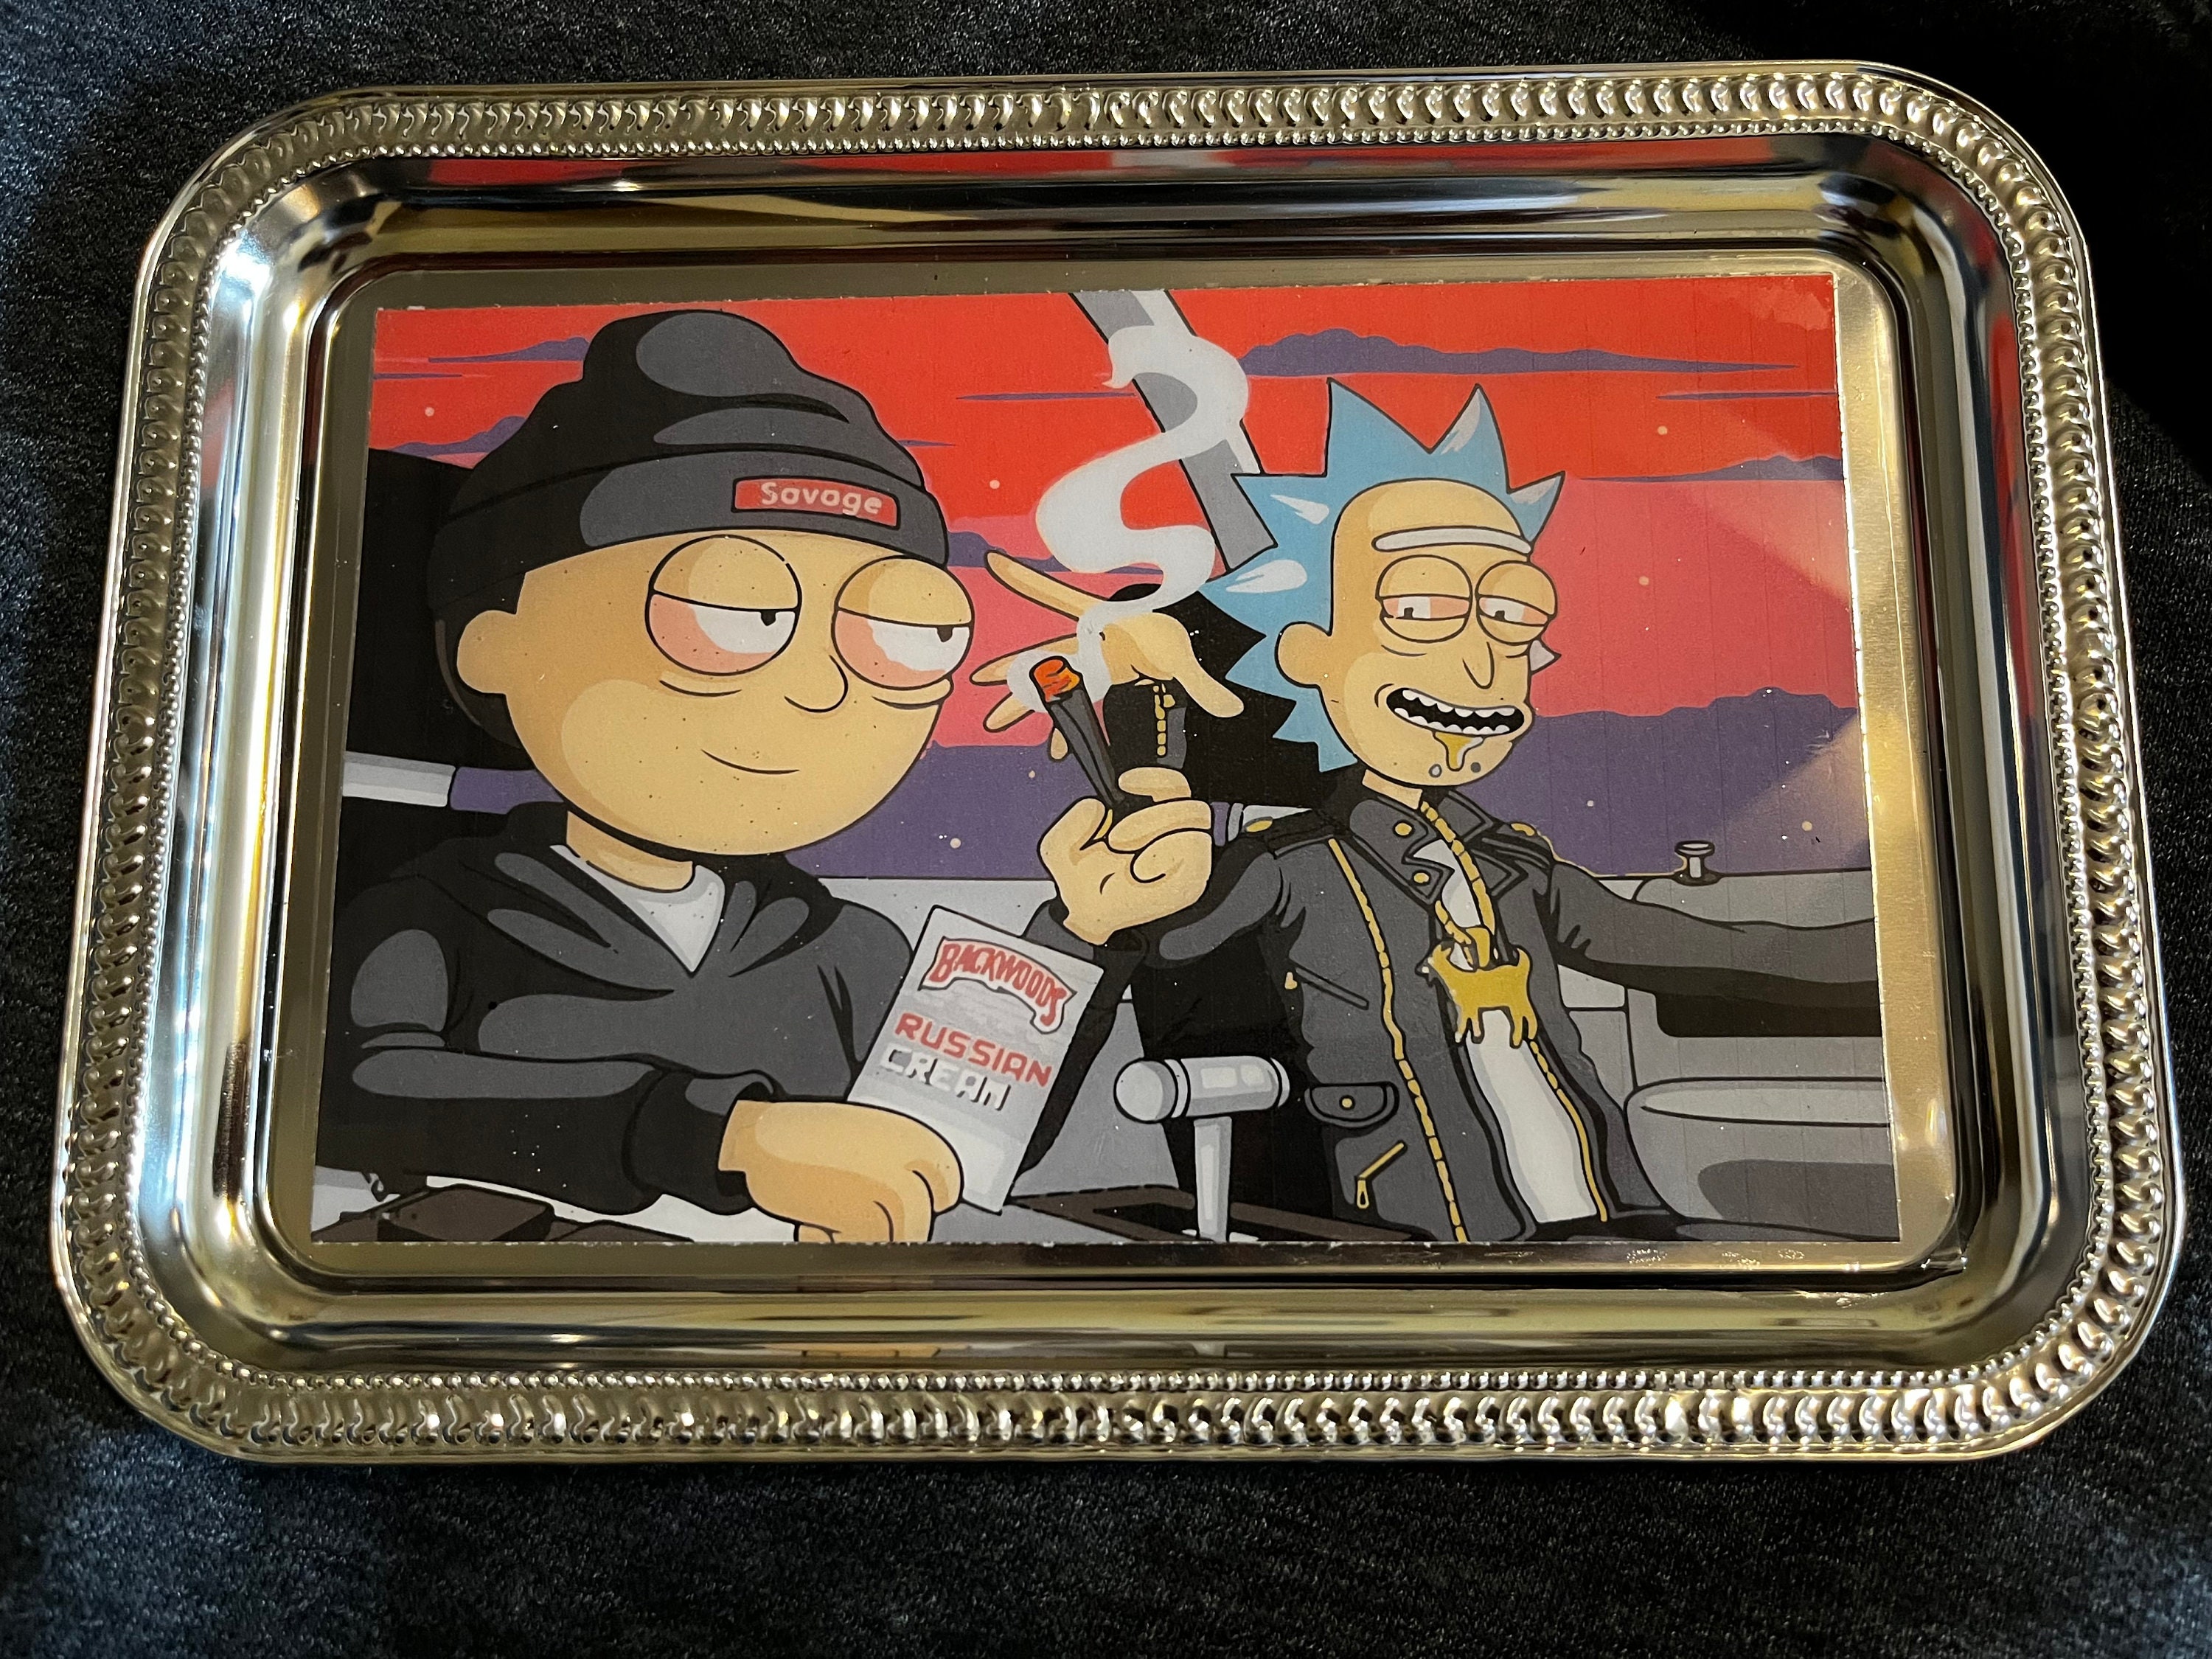 The Head Shop - Rick and Morty Metal rolling tray w/ matching holographic  tray cover! #rollingtray #theheadshop413 #rickandmortyart